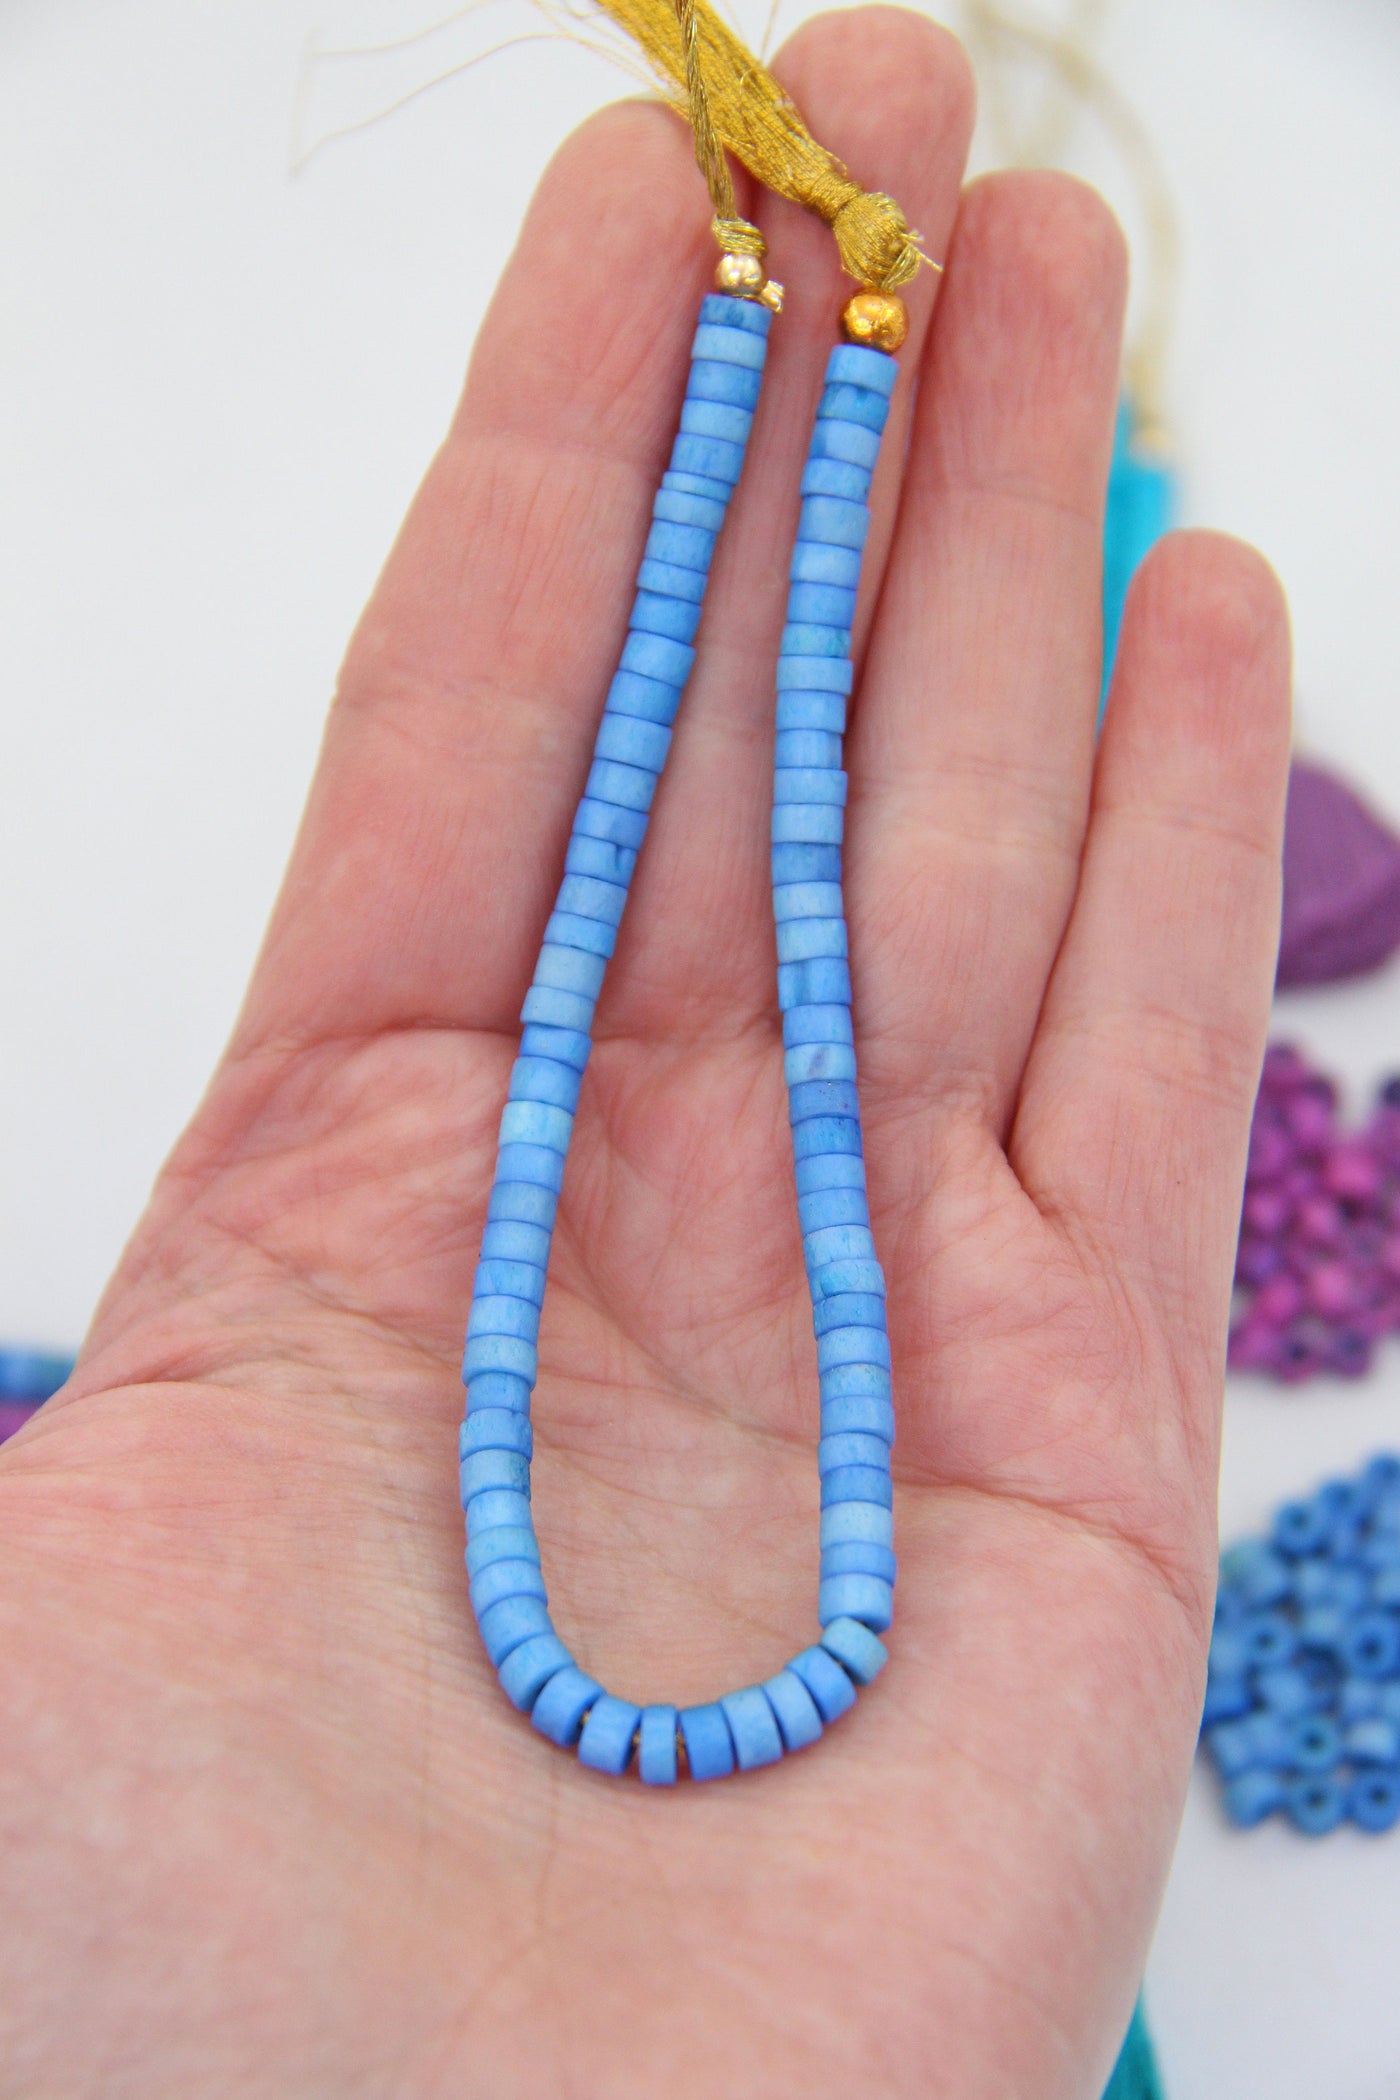 Natural Spacer Beads: 5x4mm Turquoise, Blue, Purple Heishi, Tube Shaped